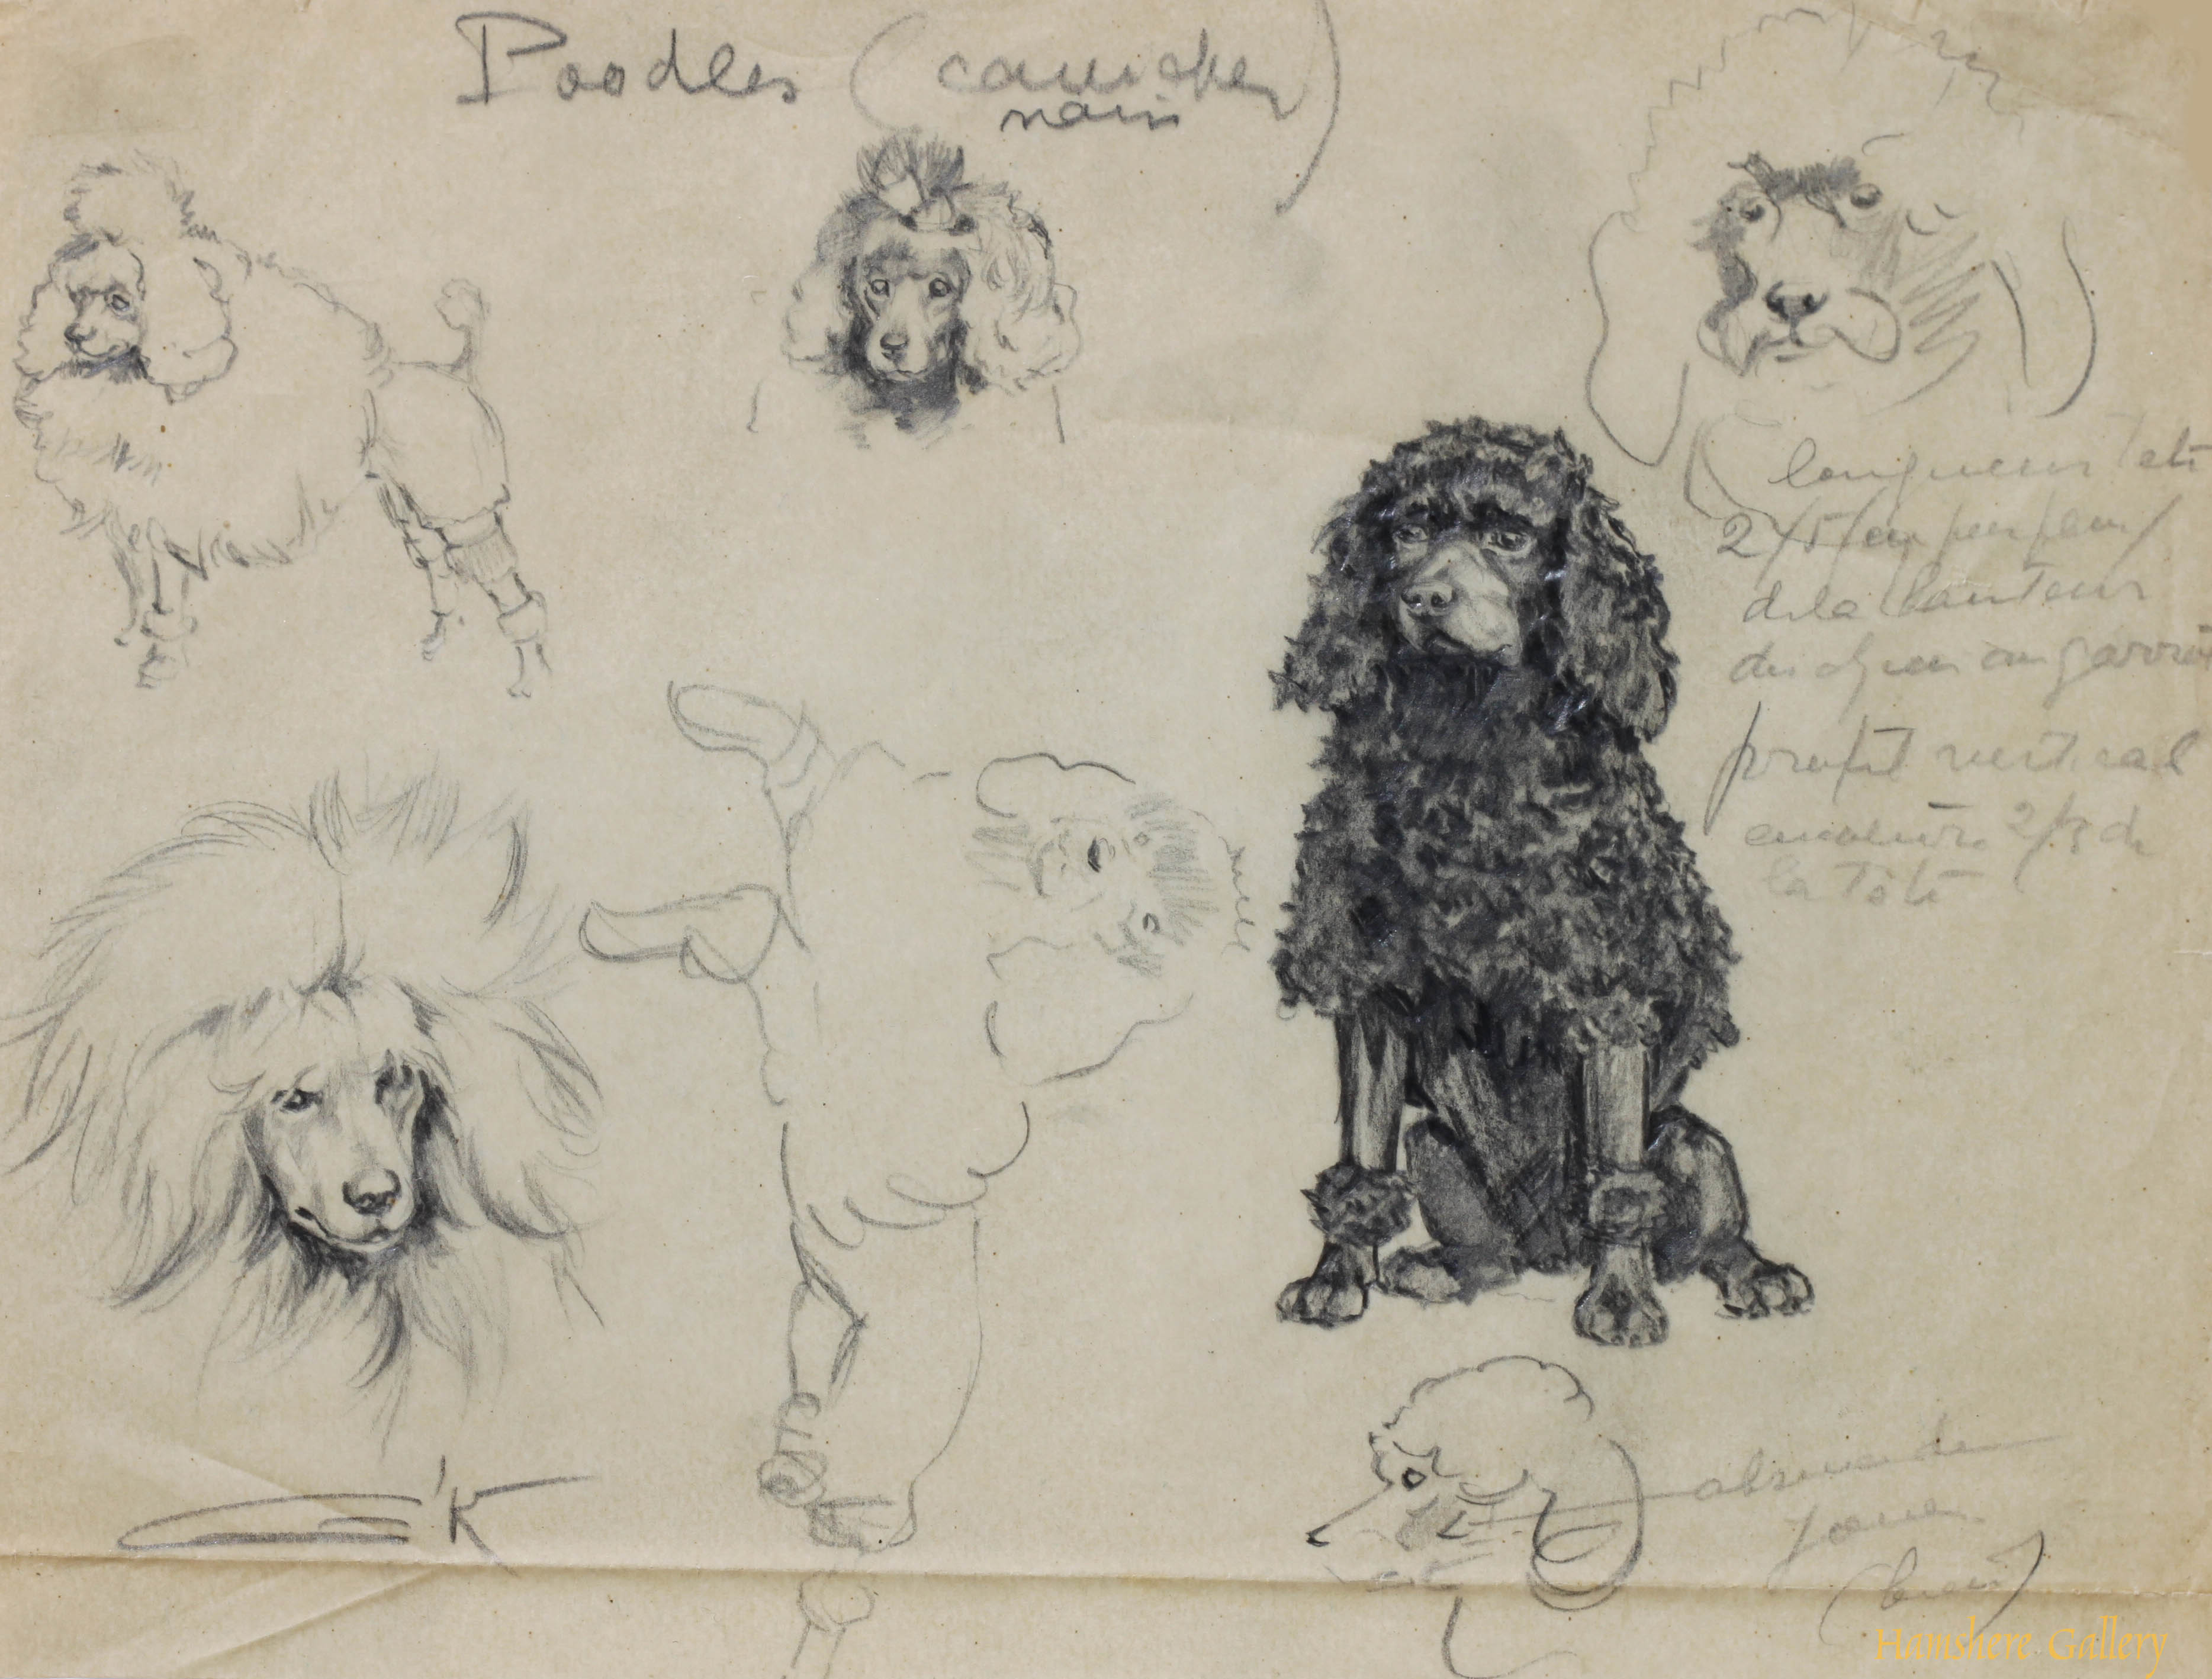 Click to see full size: Poodle / Cainche pencil studies by Borris O�Klein / Jean Herblet - Poodle / Cainche pencil studies by Borris O�Klein / Jean Herblet 